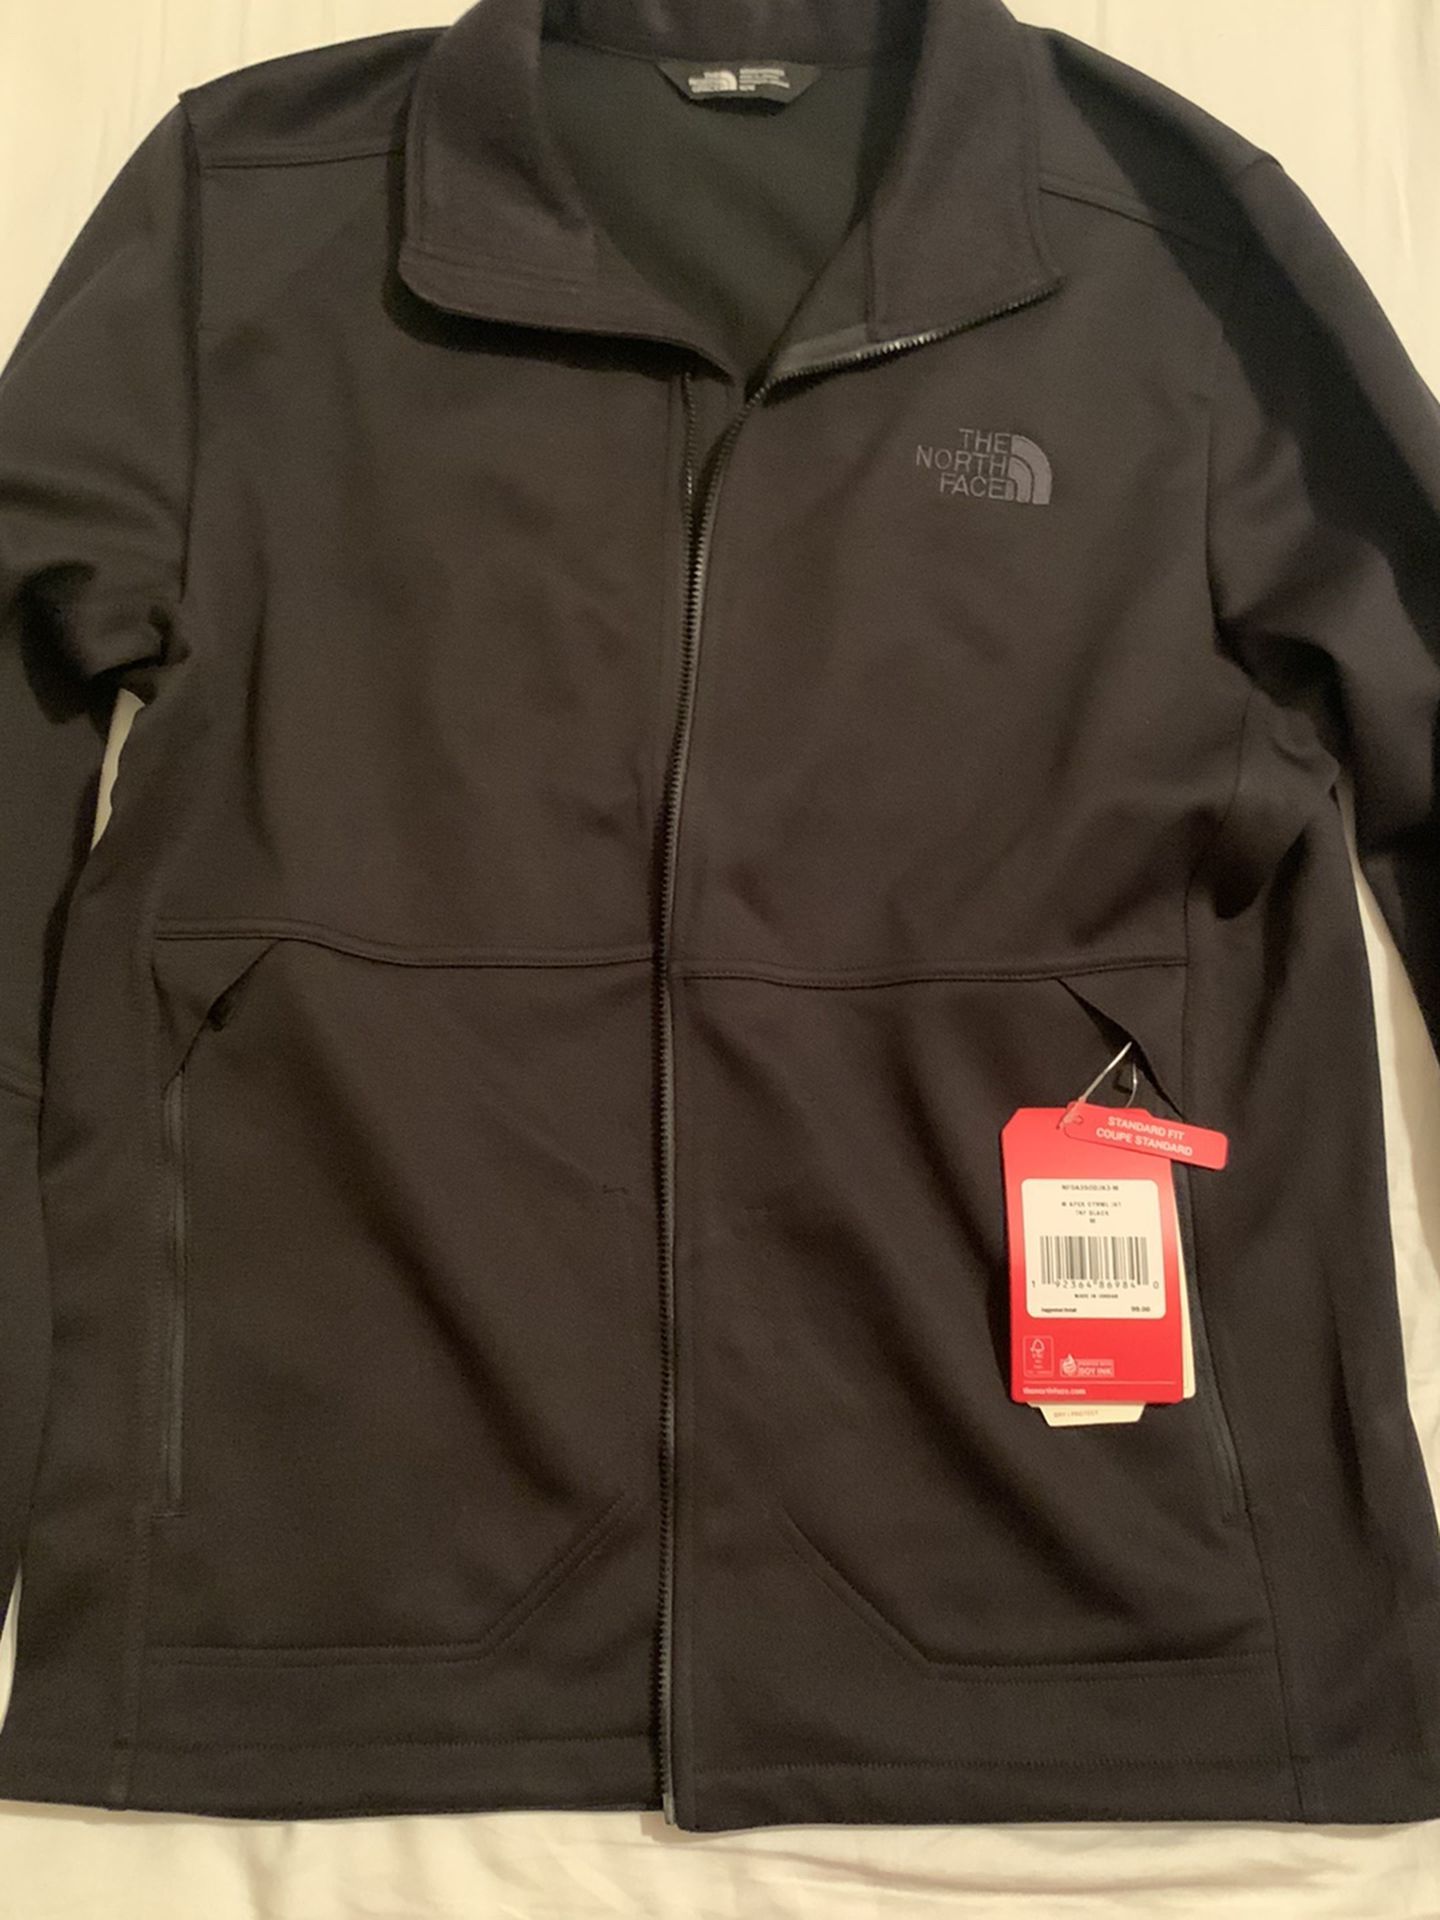 Brand New North Face Apex Jacket